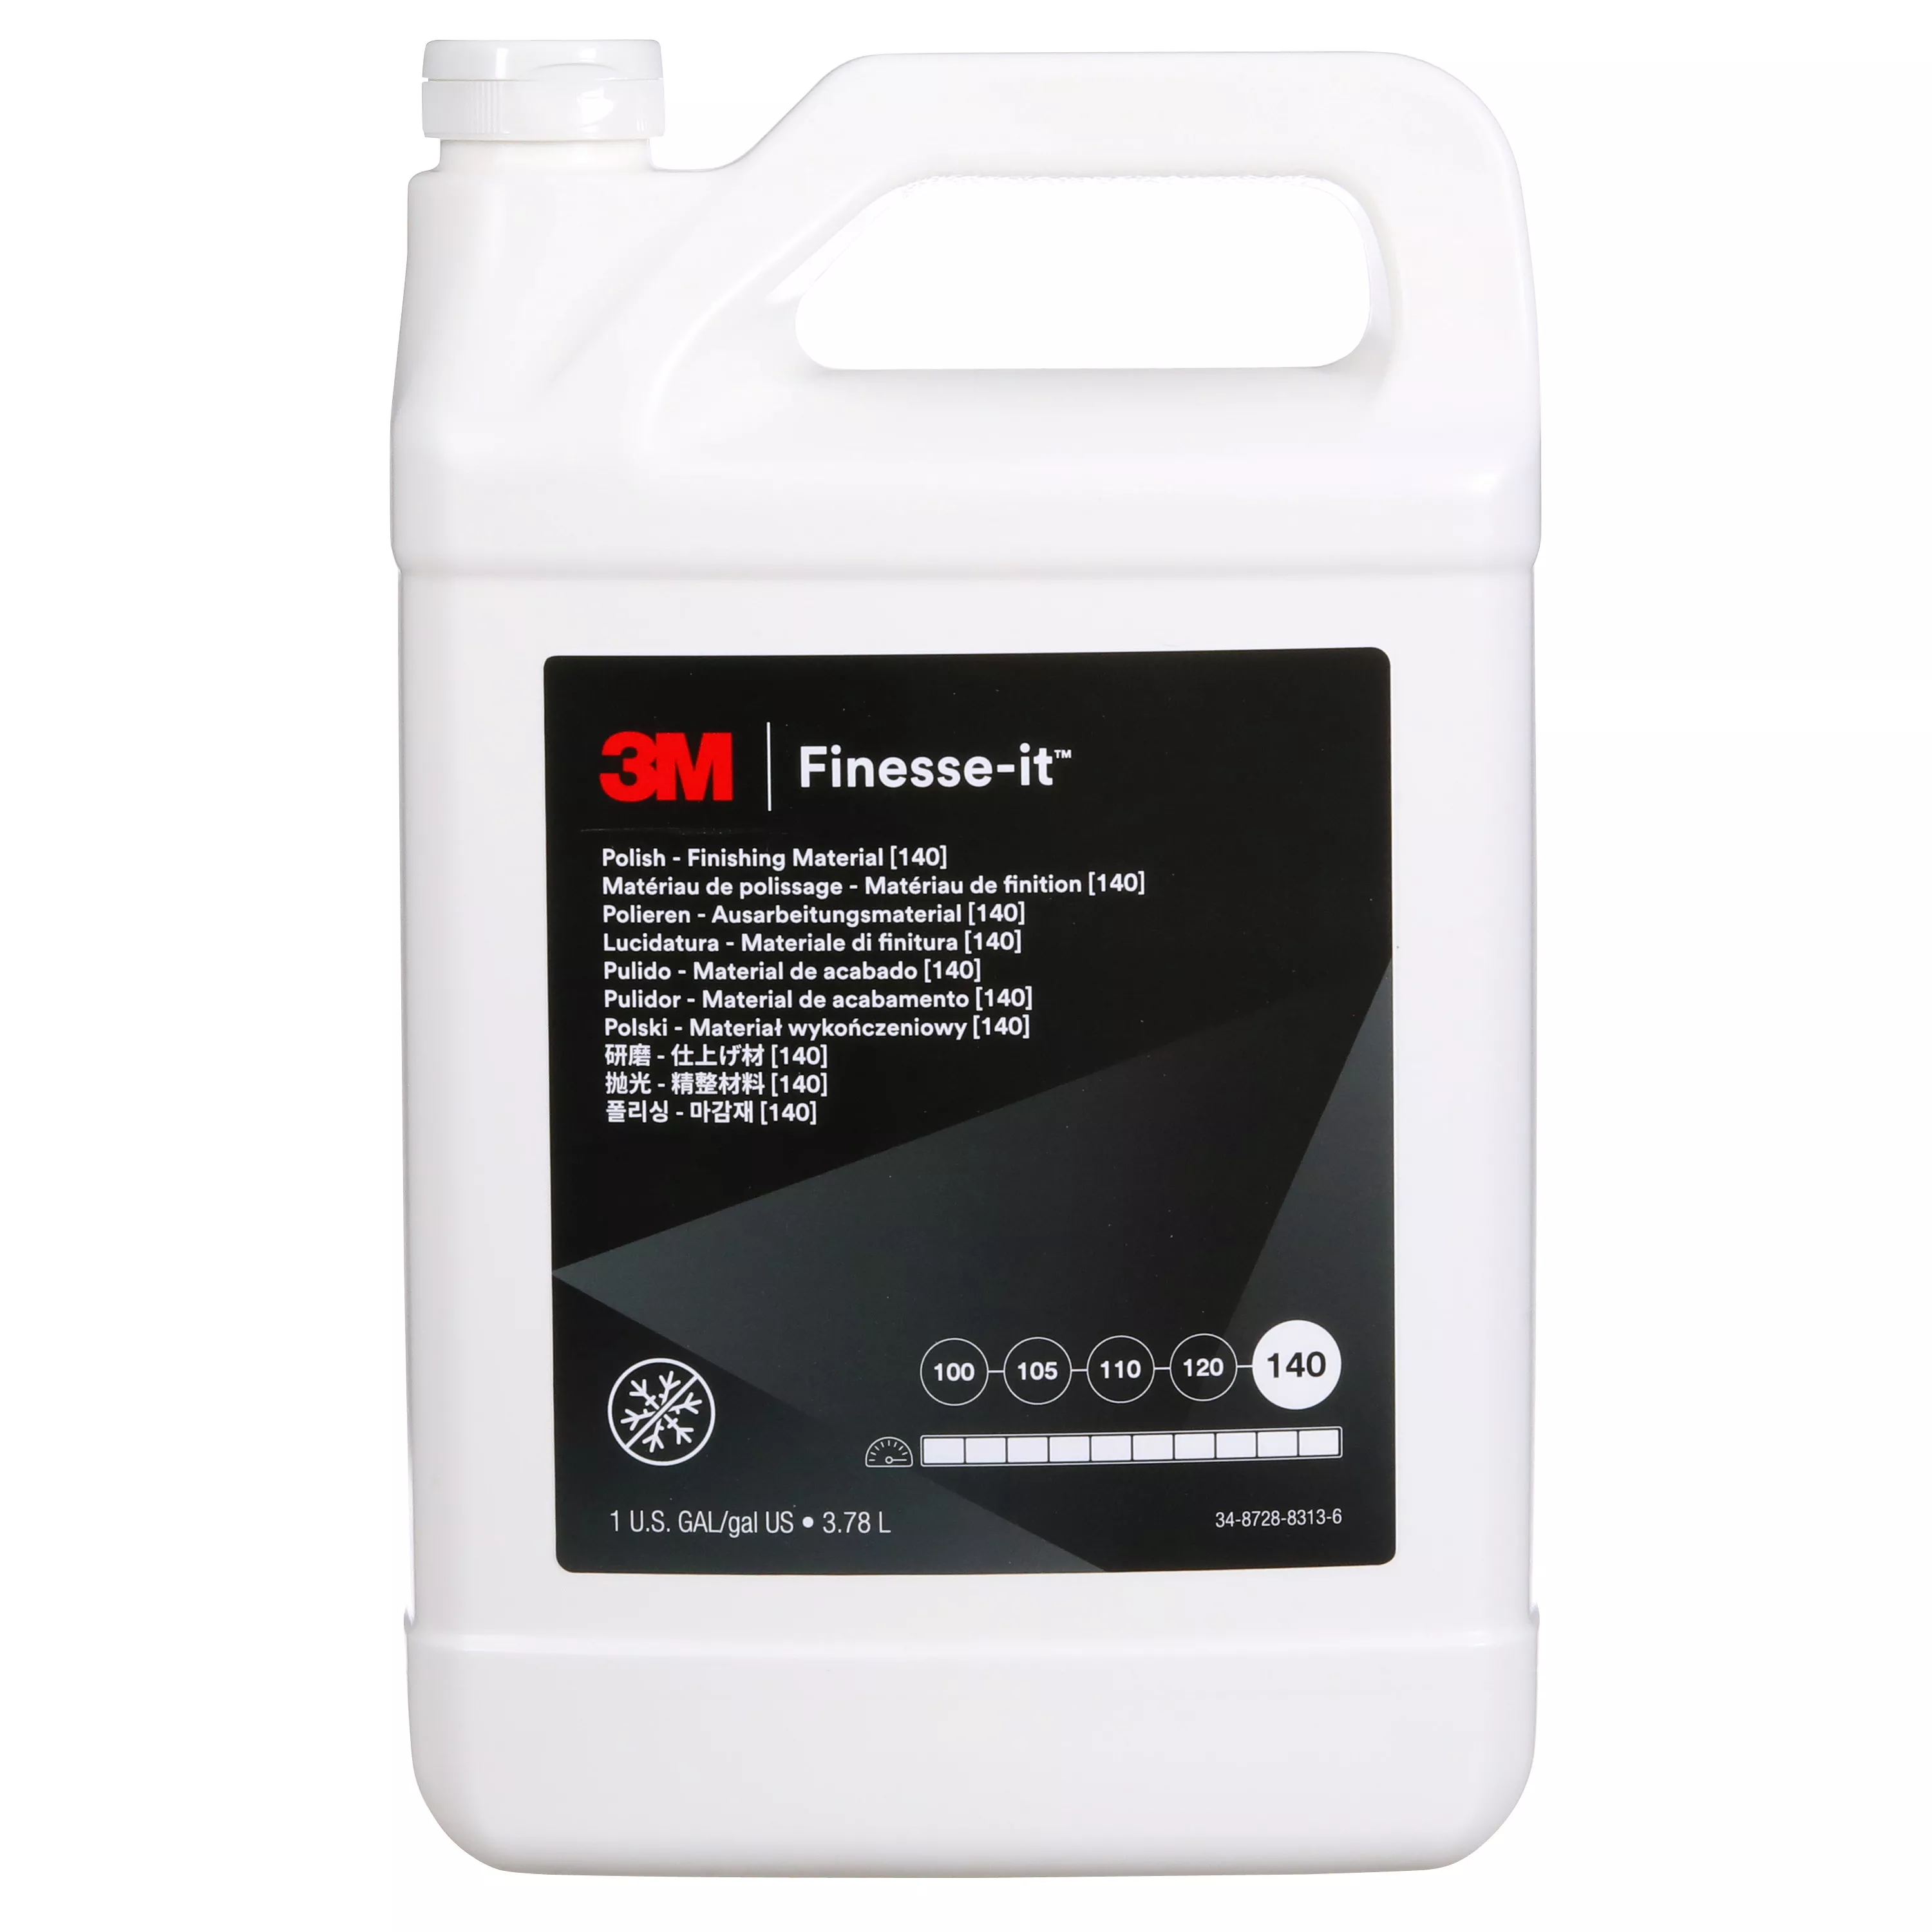 3M™ Finesse-it™ Polish Standard Series - Finishing Material (140),
13084, White, Easy Clean Up, 1 Gallon (3.785 Liter), 4 ea/Case